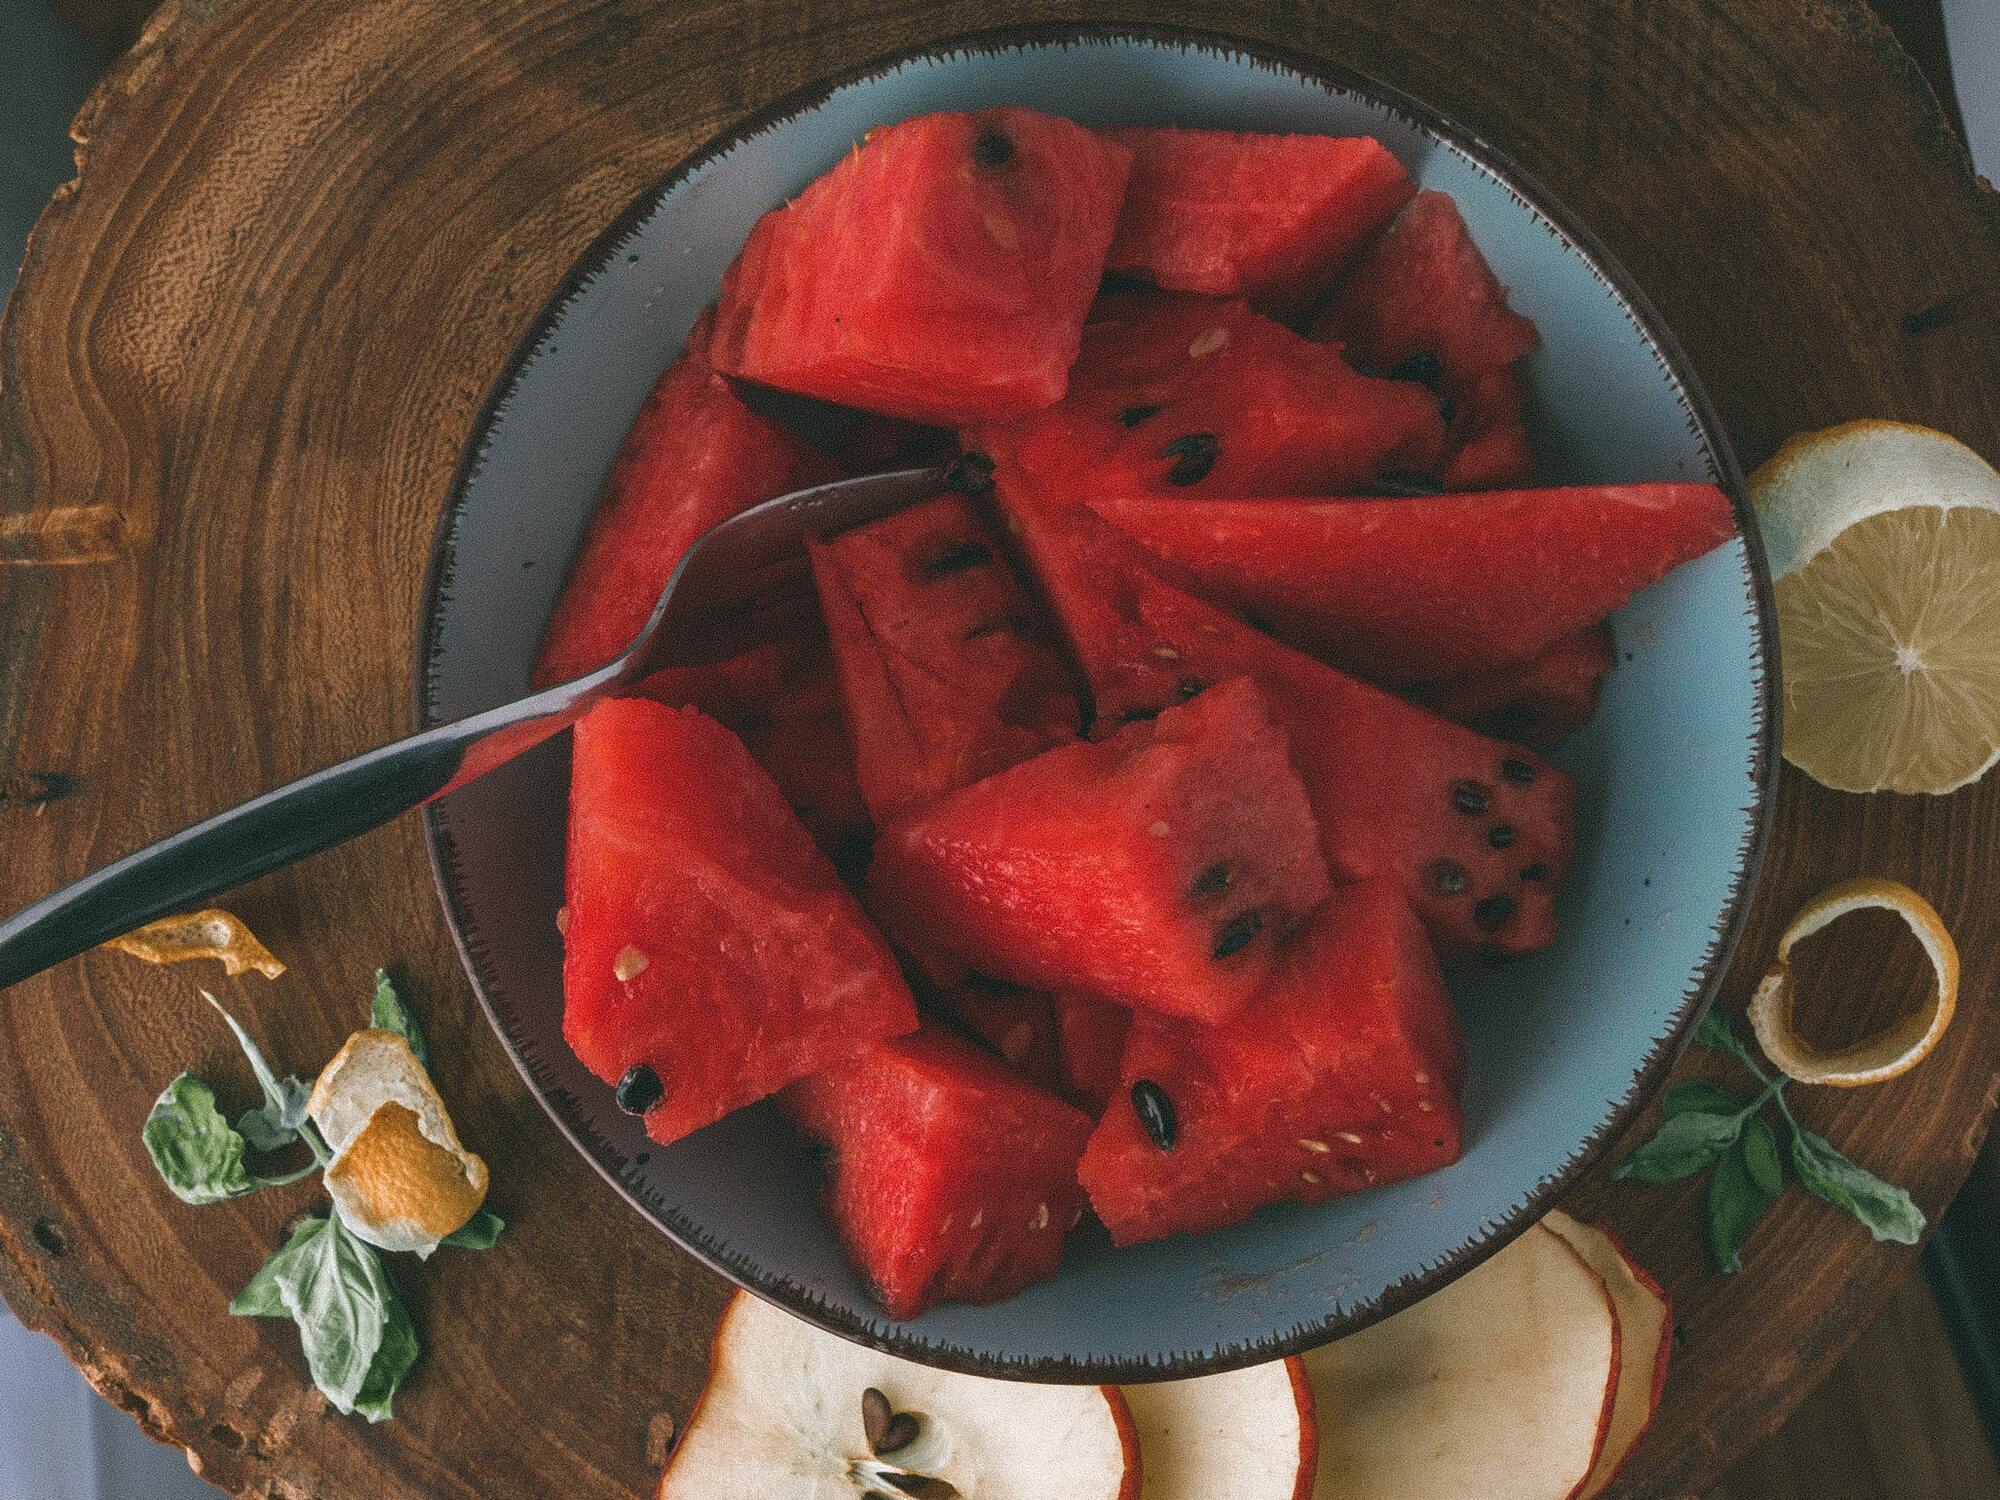 Delicious salad with juicy watermelon: the perfect appetizer for the summer heat